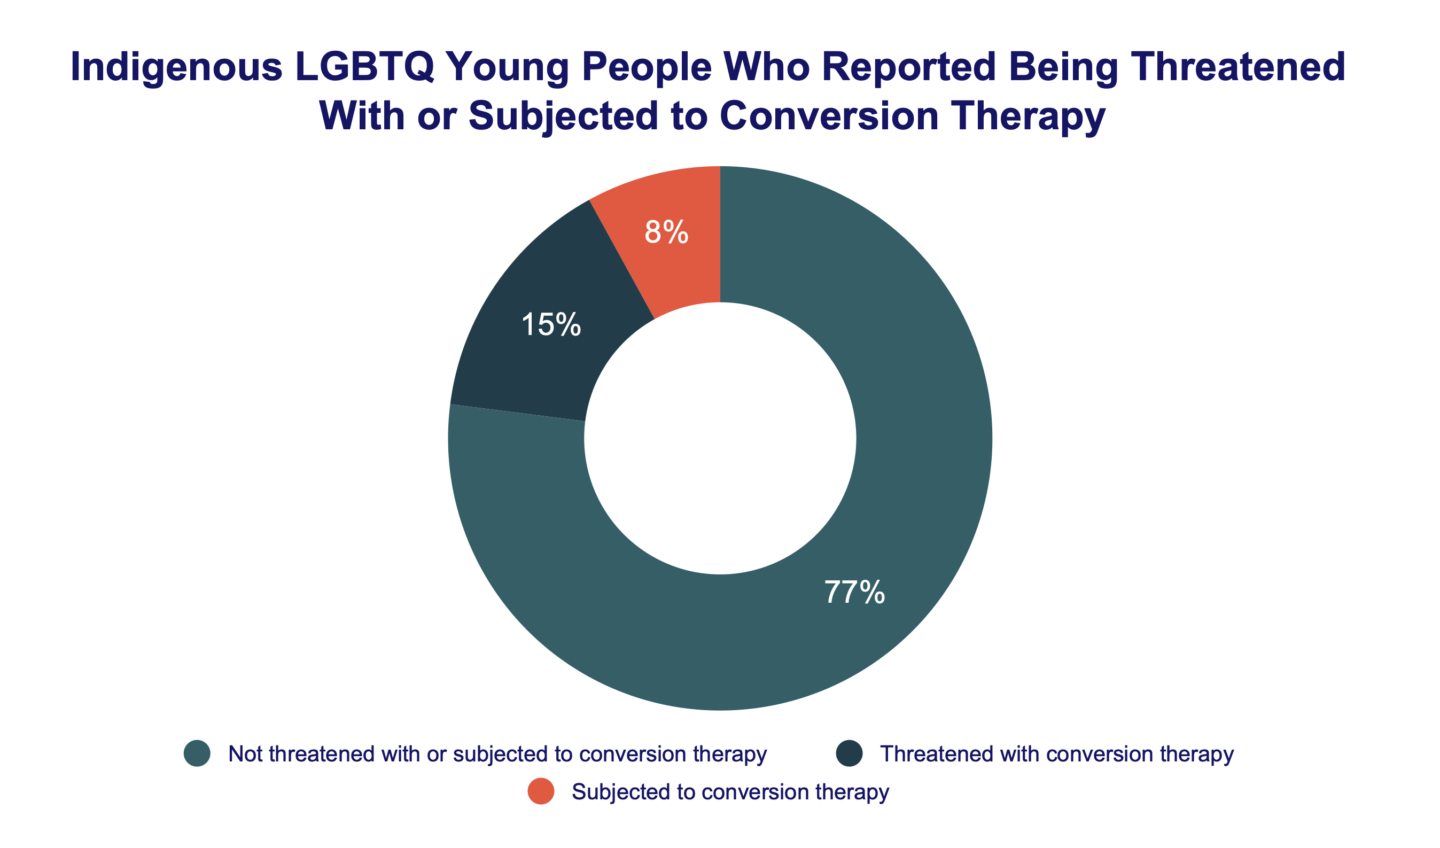 Indigenous LGBTQ Young People Who Reported Being Threatened With or Subjected to Conversion Therapy